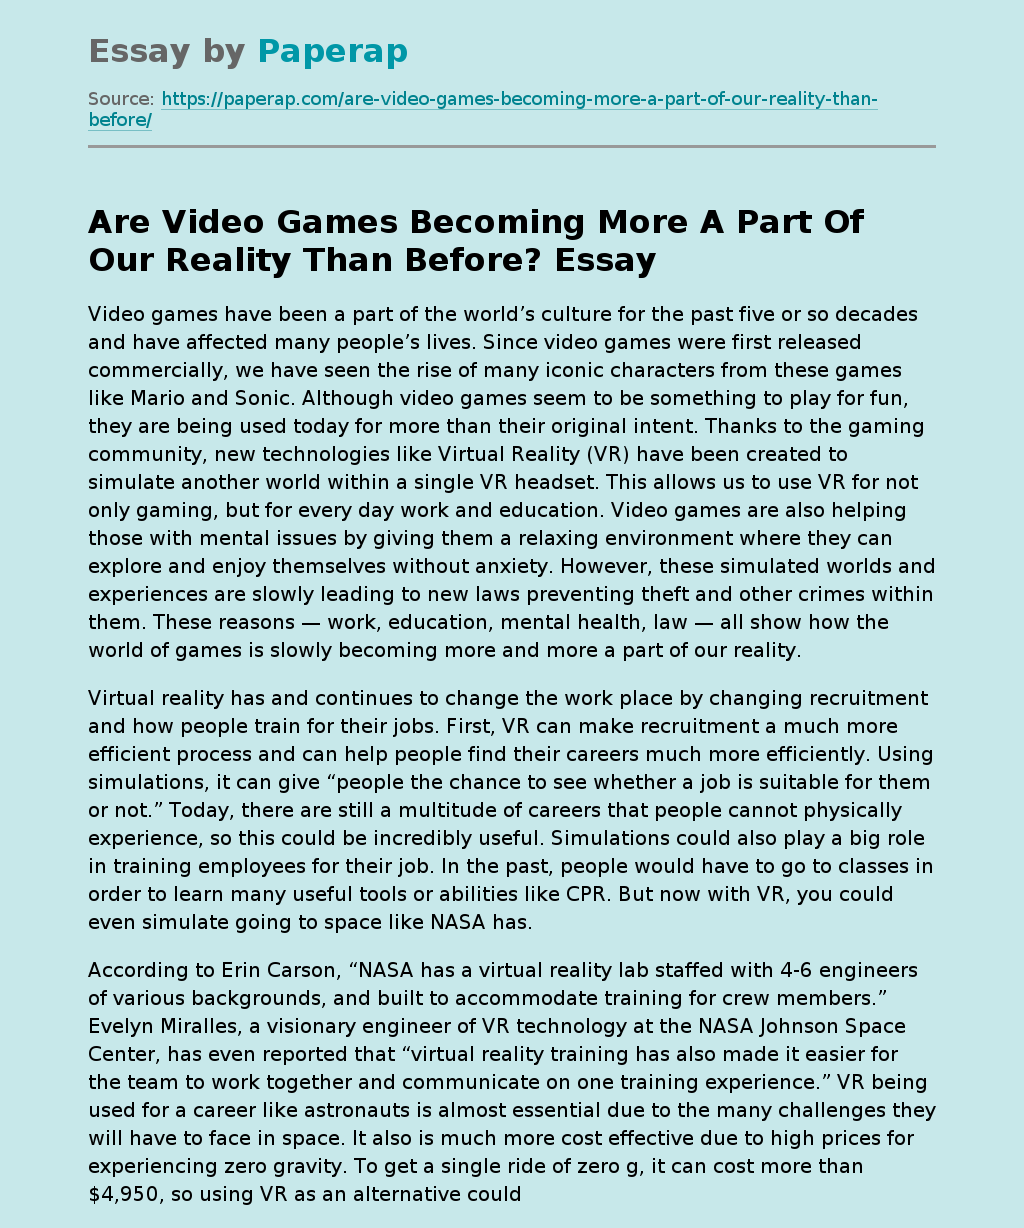 Are Video Games Becoming More A Part Of Our Reality Than Before?